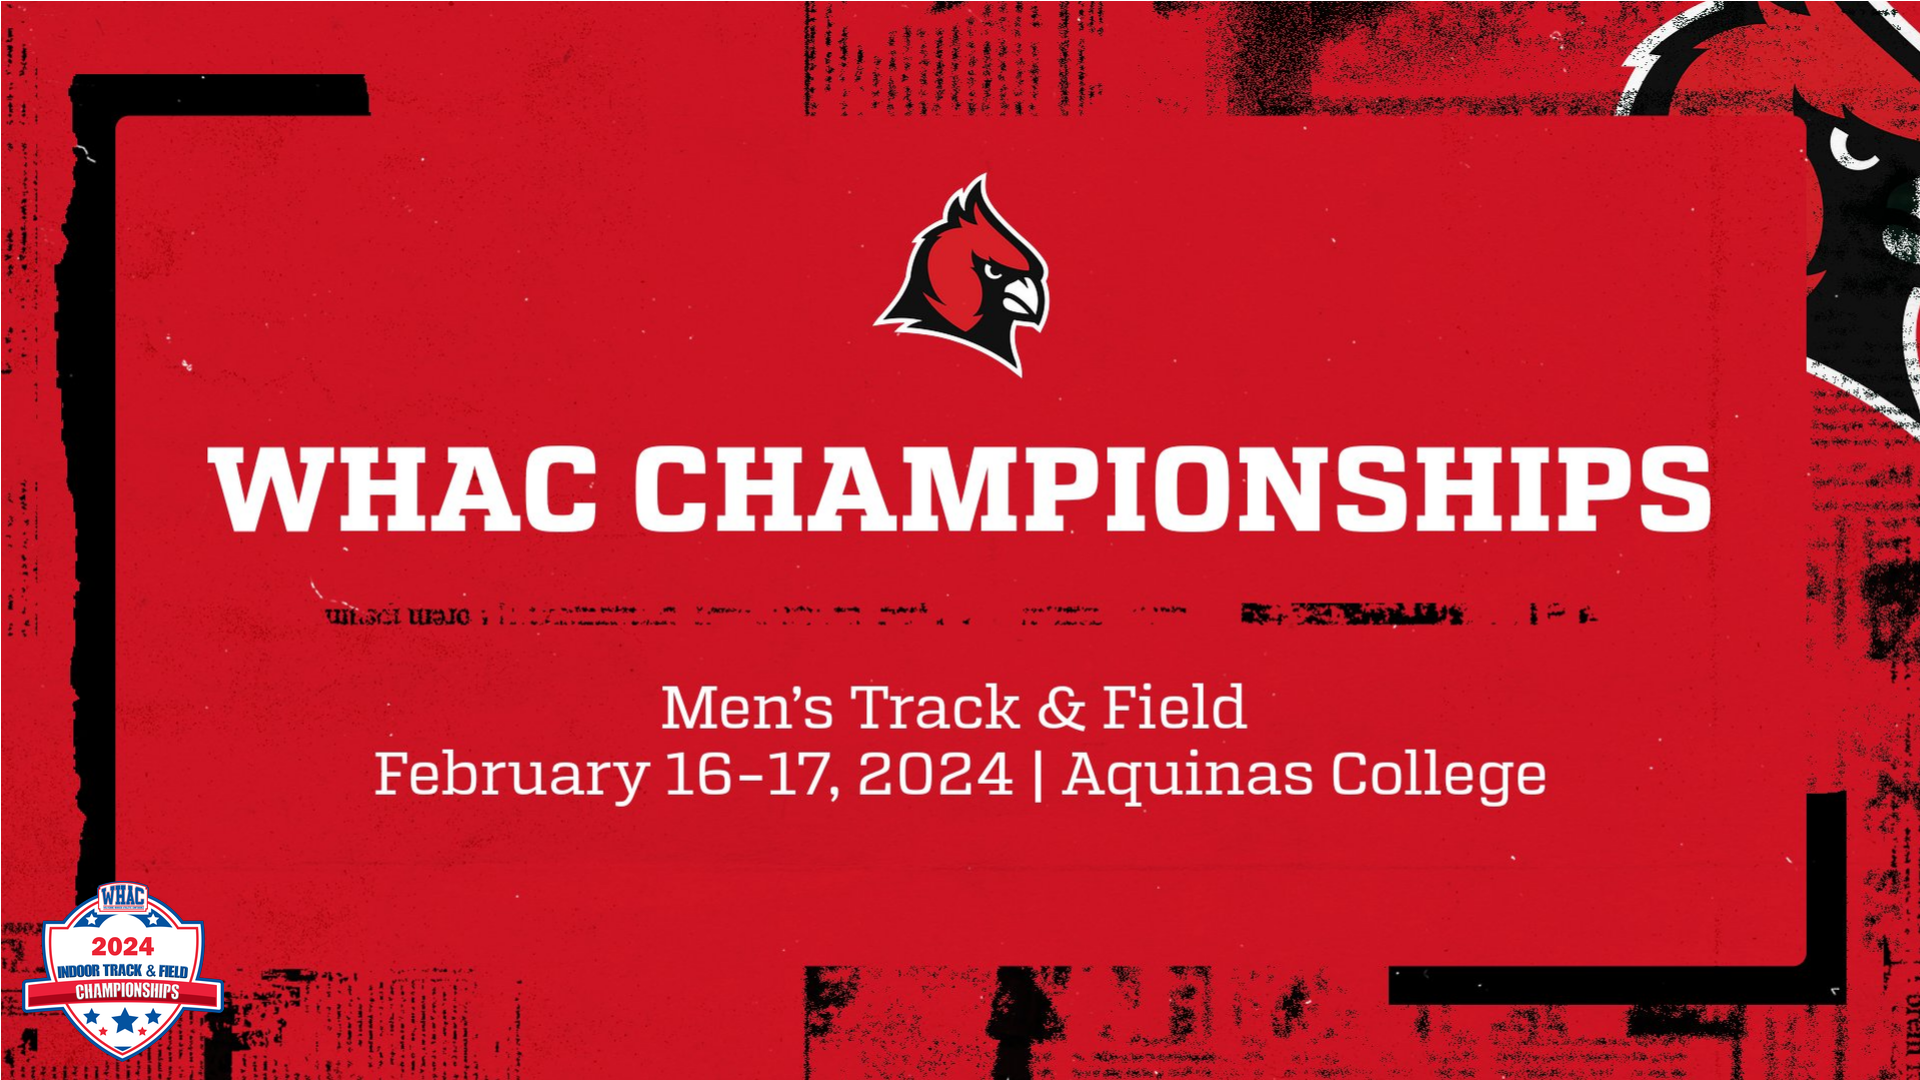 WHAC CHAMPIONSHIP PREVIEW: Men's Track & Field set to compete at the WHAC Championships